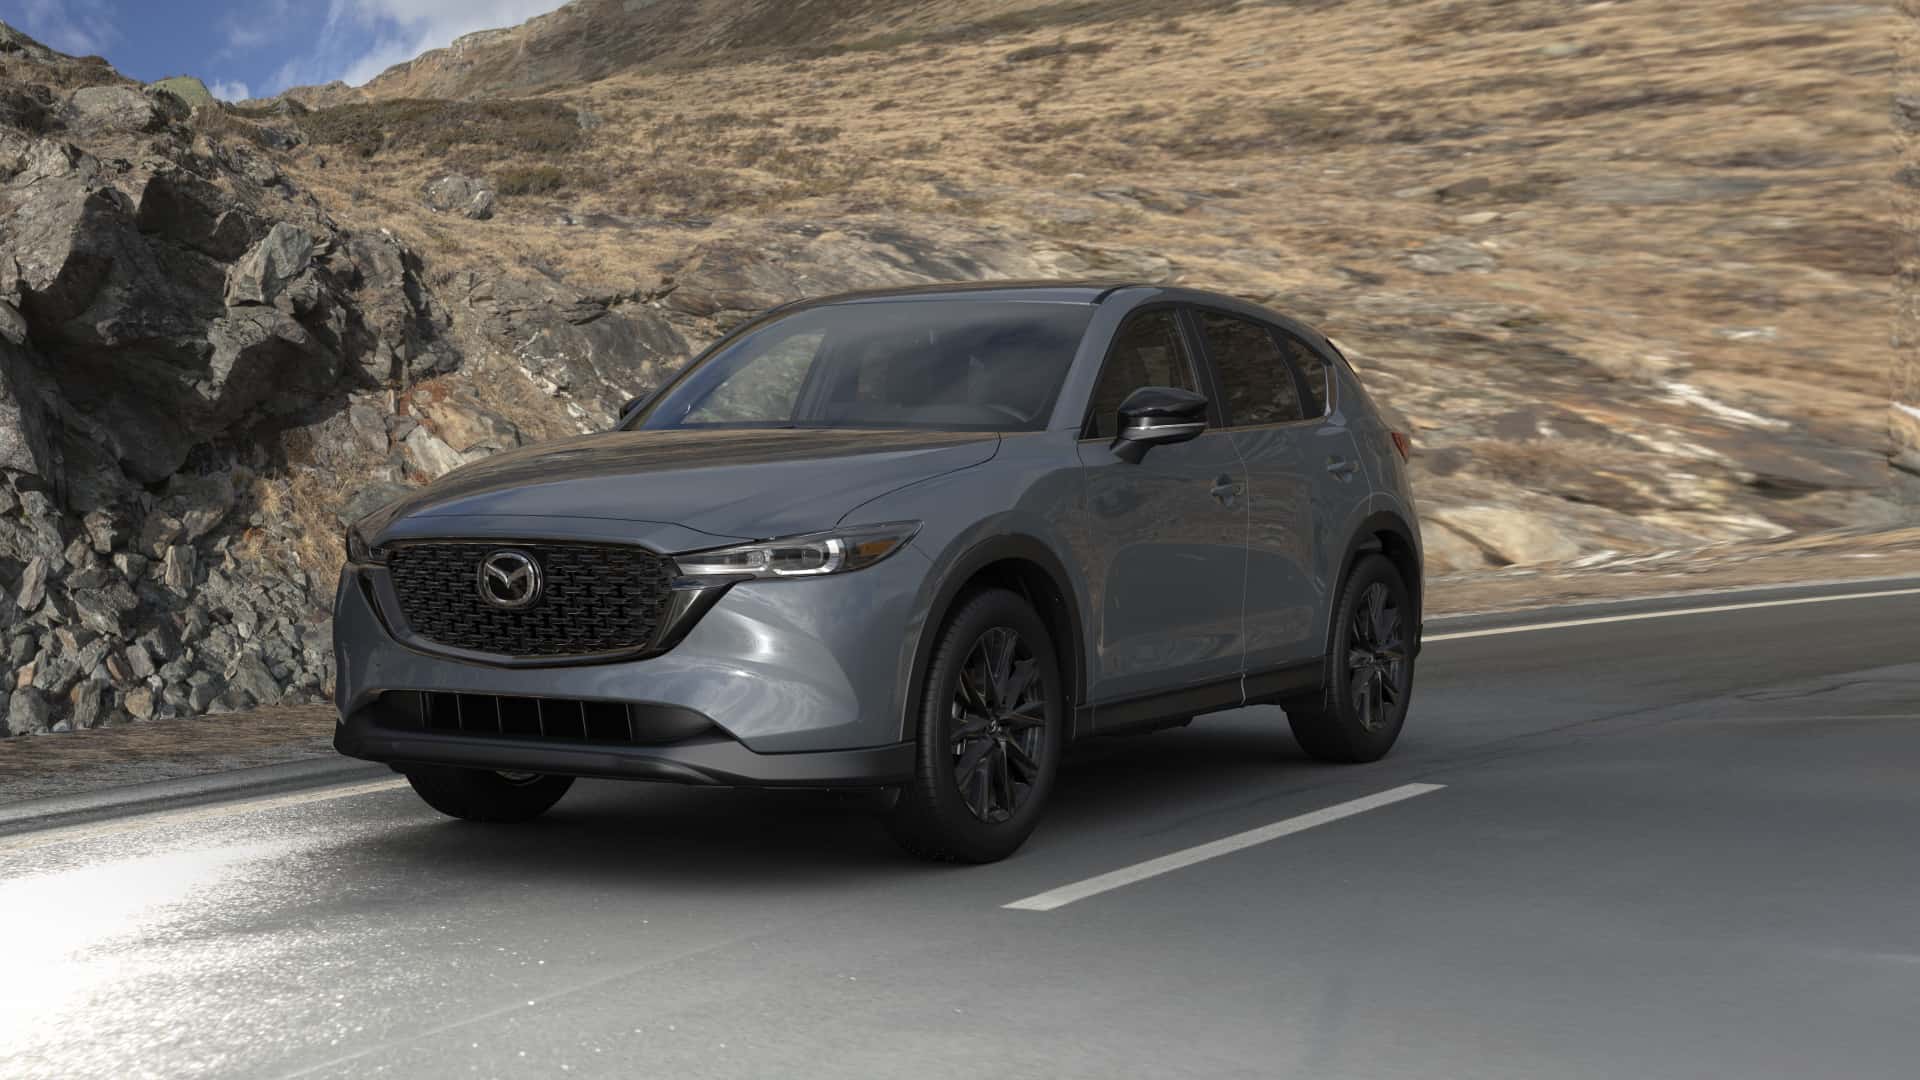 2023 Mazda CX-5 2.5 S Carbon Edition Polymetal Gray Metallic | Cook Mazda in Aberdeen MD